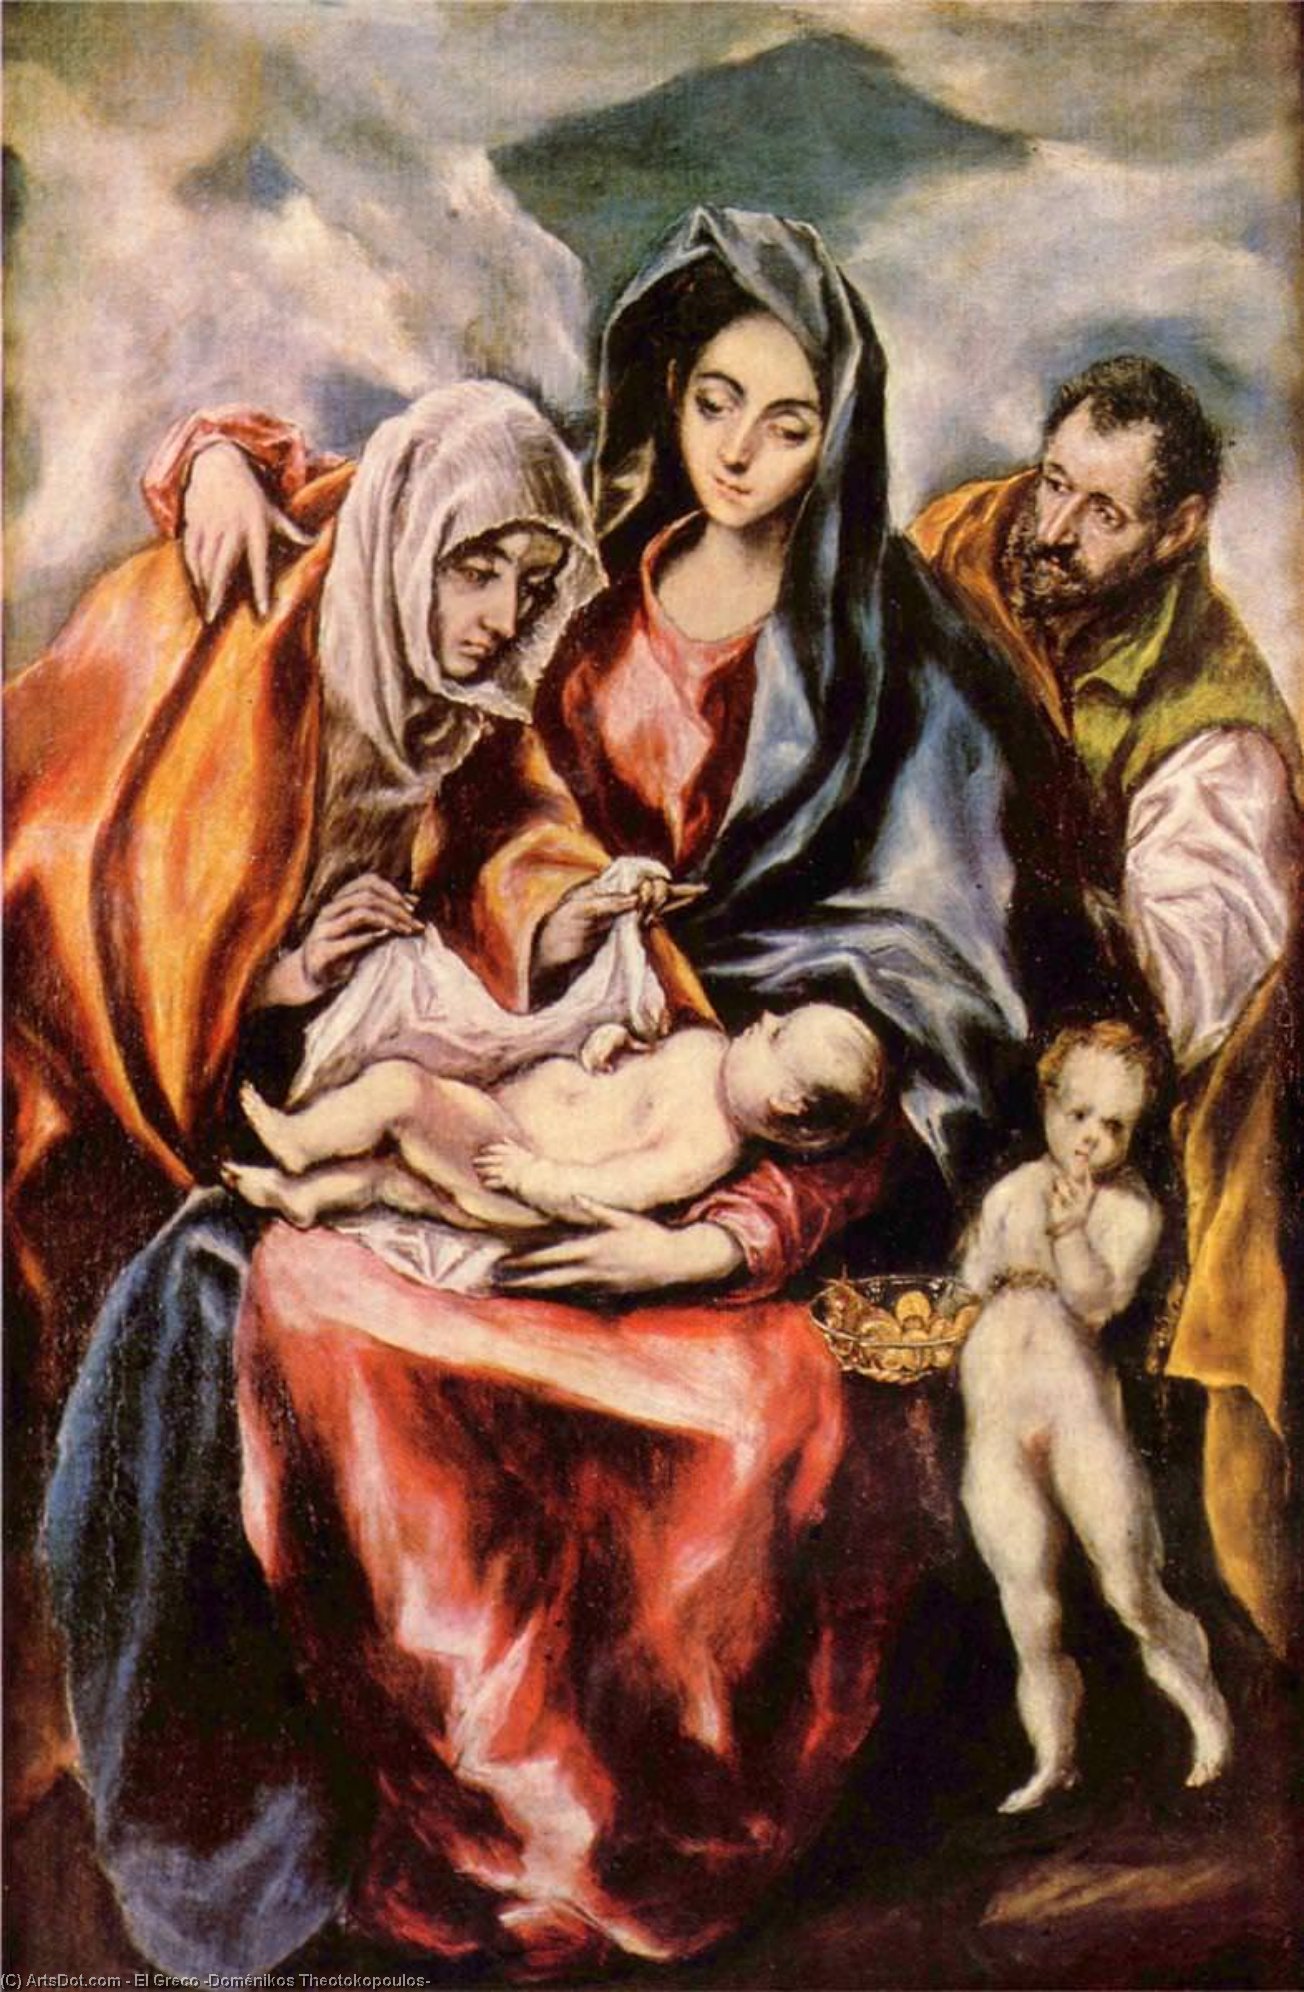 WikiOO.org - 백과 사전 - 회화, 삽화 El Greco (Doménikos Theotokopoulos) - The Holy Family with St. Anne and the Young St. John the Baptist